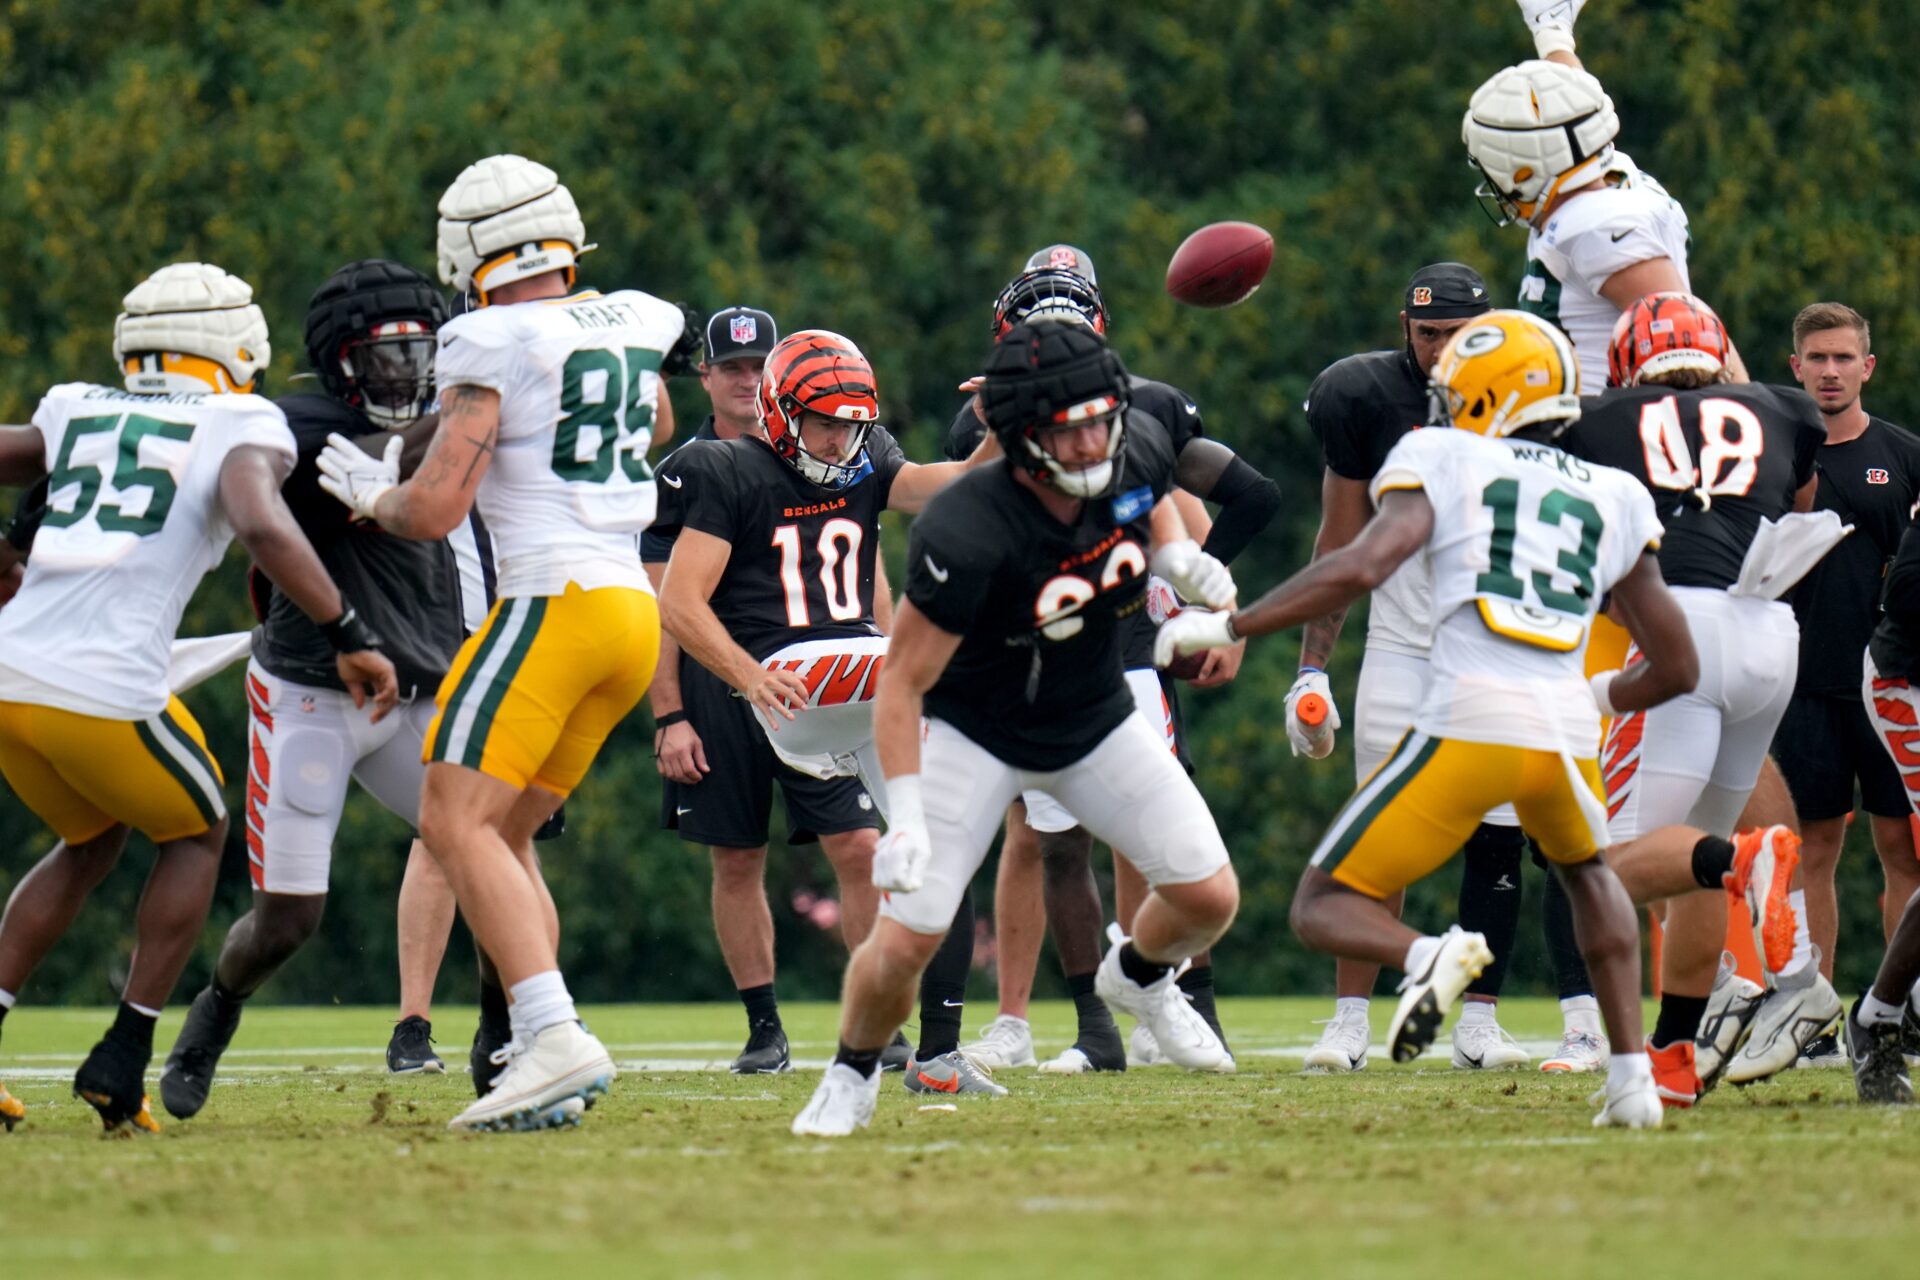 A zoomed-out image showing two teams at the line of scrimmage while a punter gets ready to punt the ball